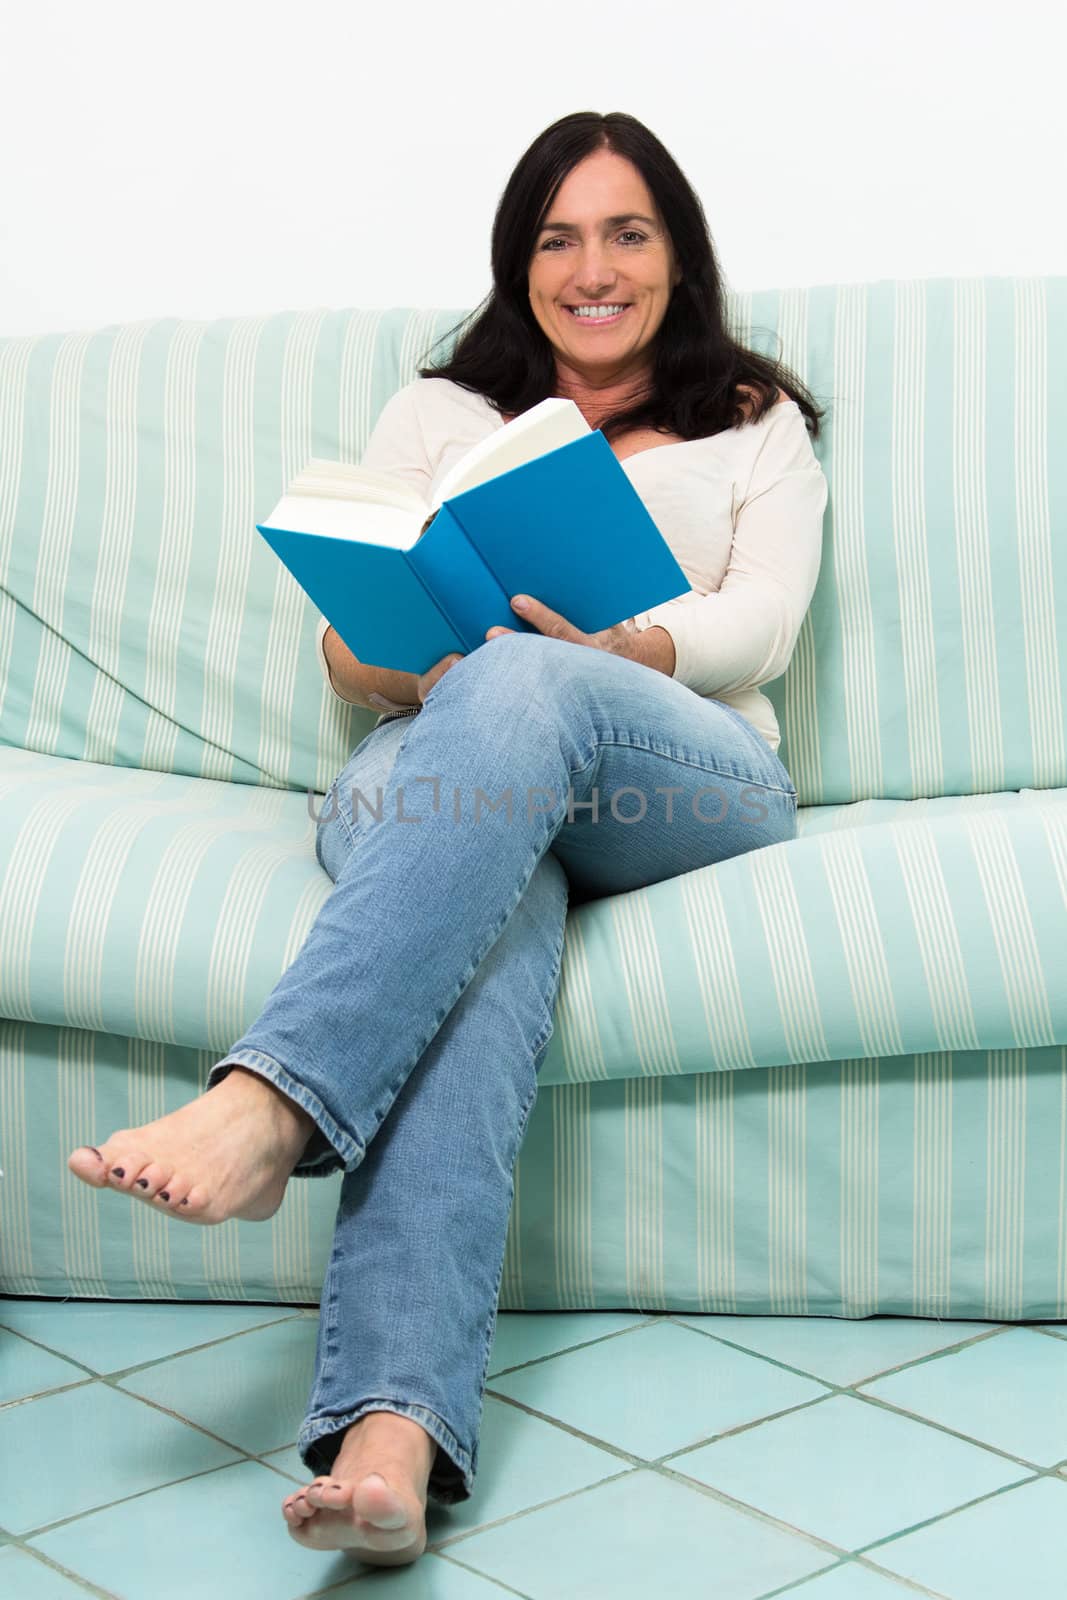 Dark haired woman lying on couch and reading a blue book